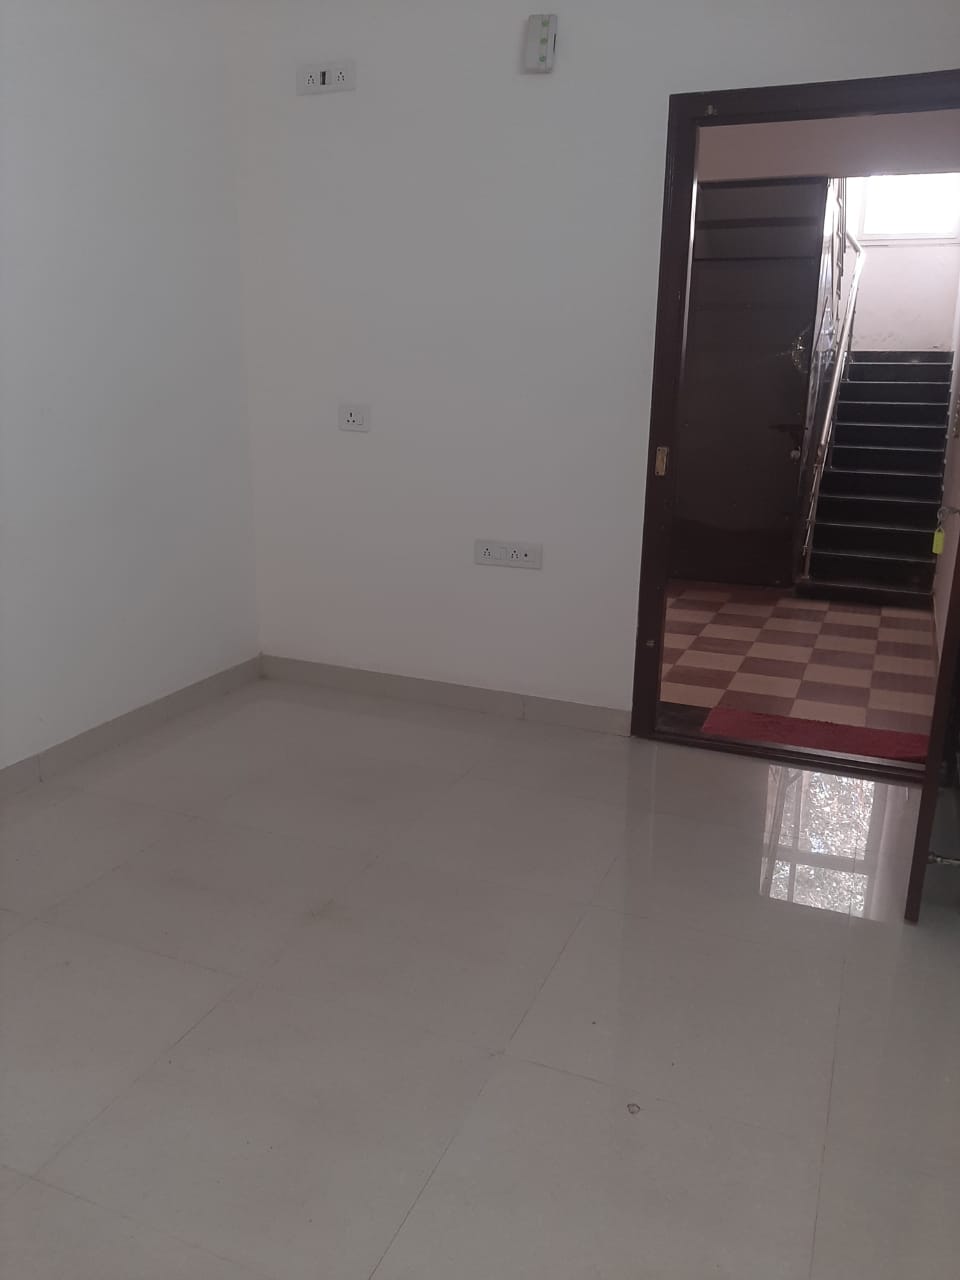 1 BHK Independent House for Lease Only at JAML2 - 3612 - 15 Lakhs in Domlur